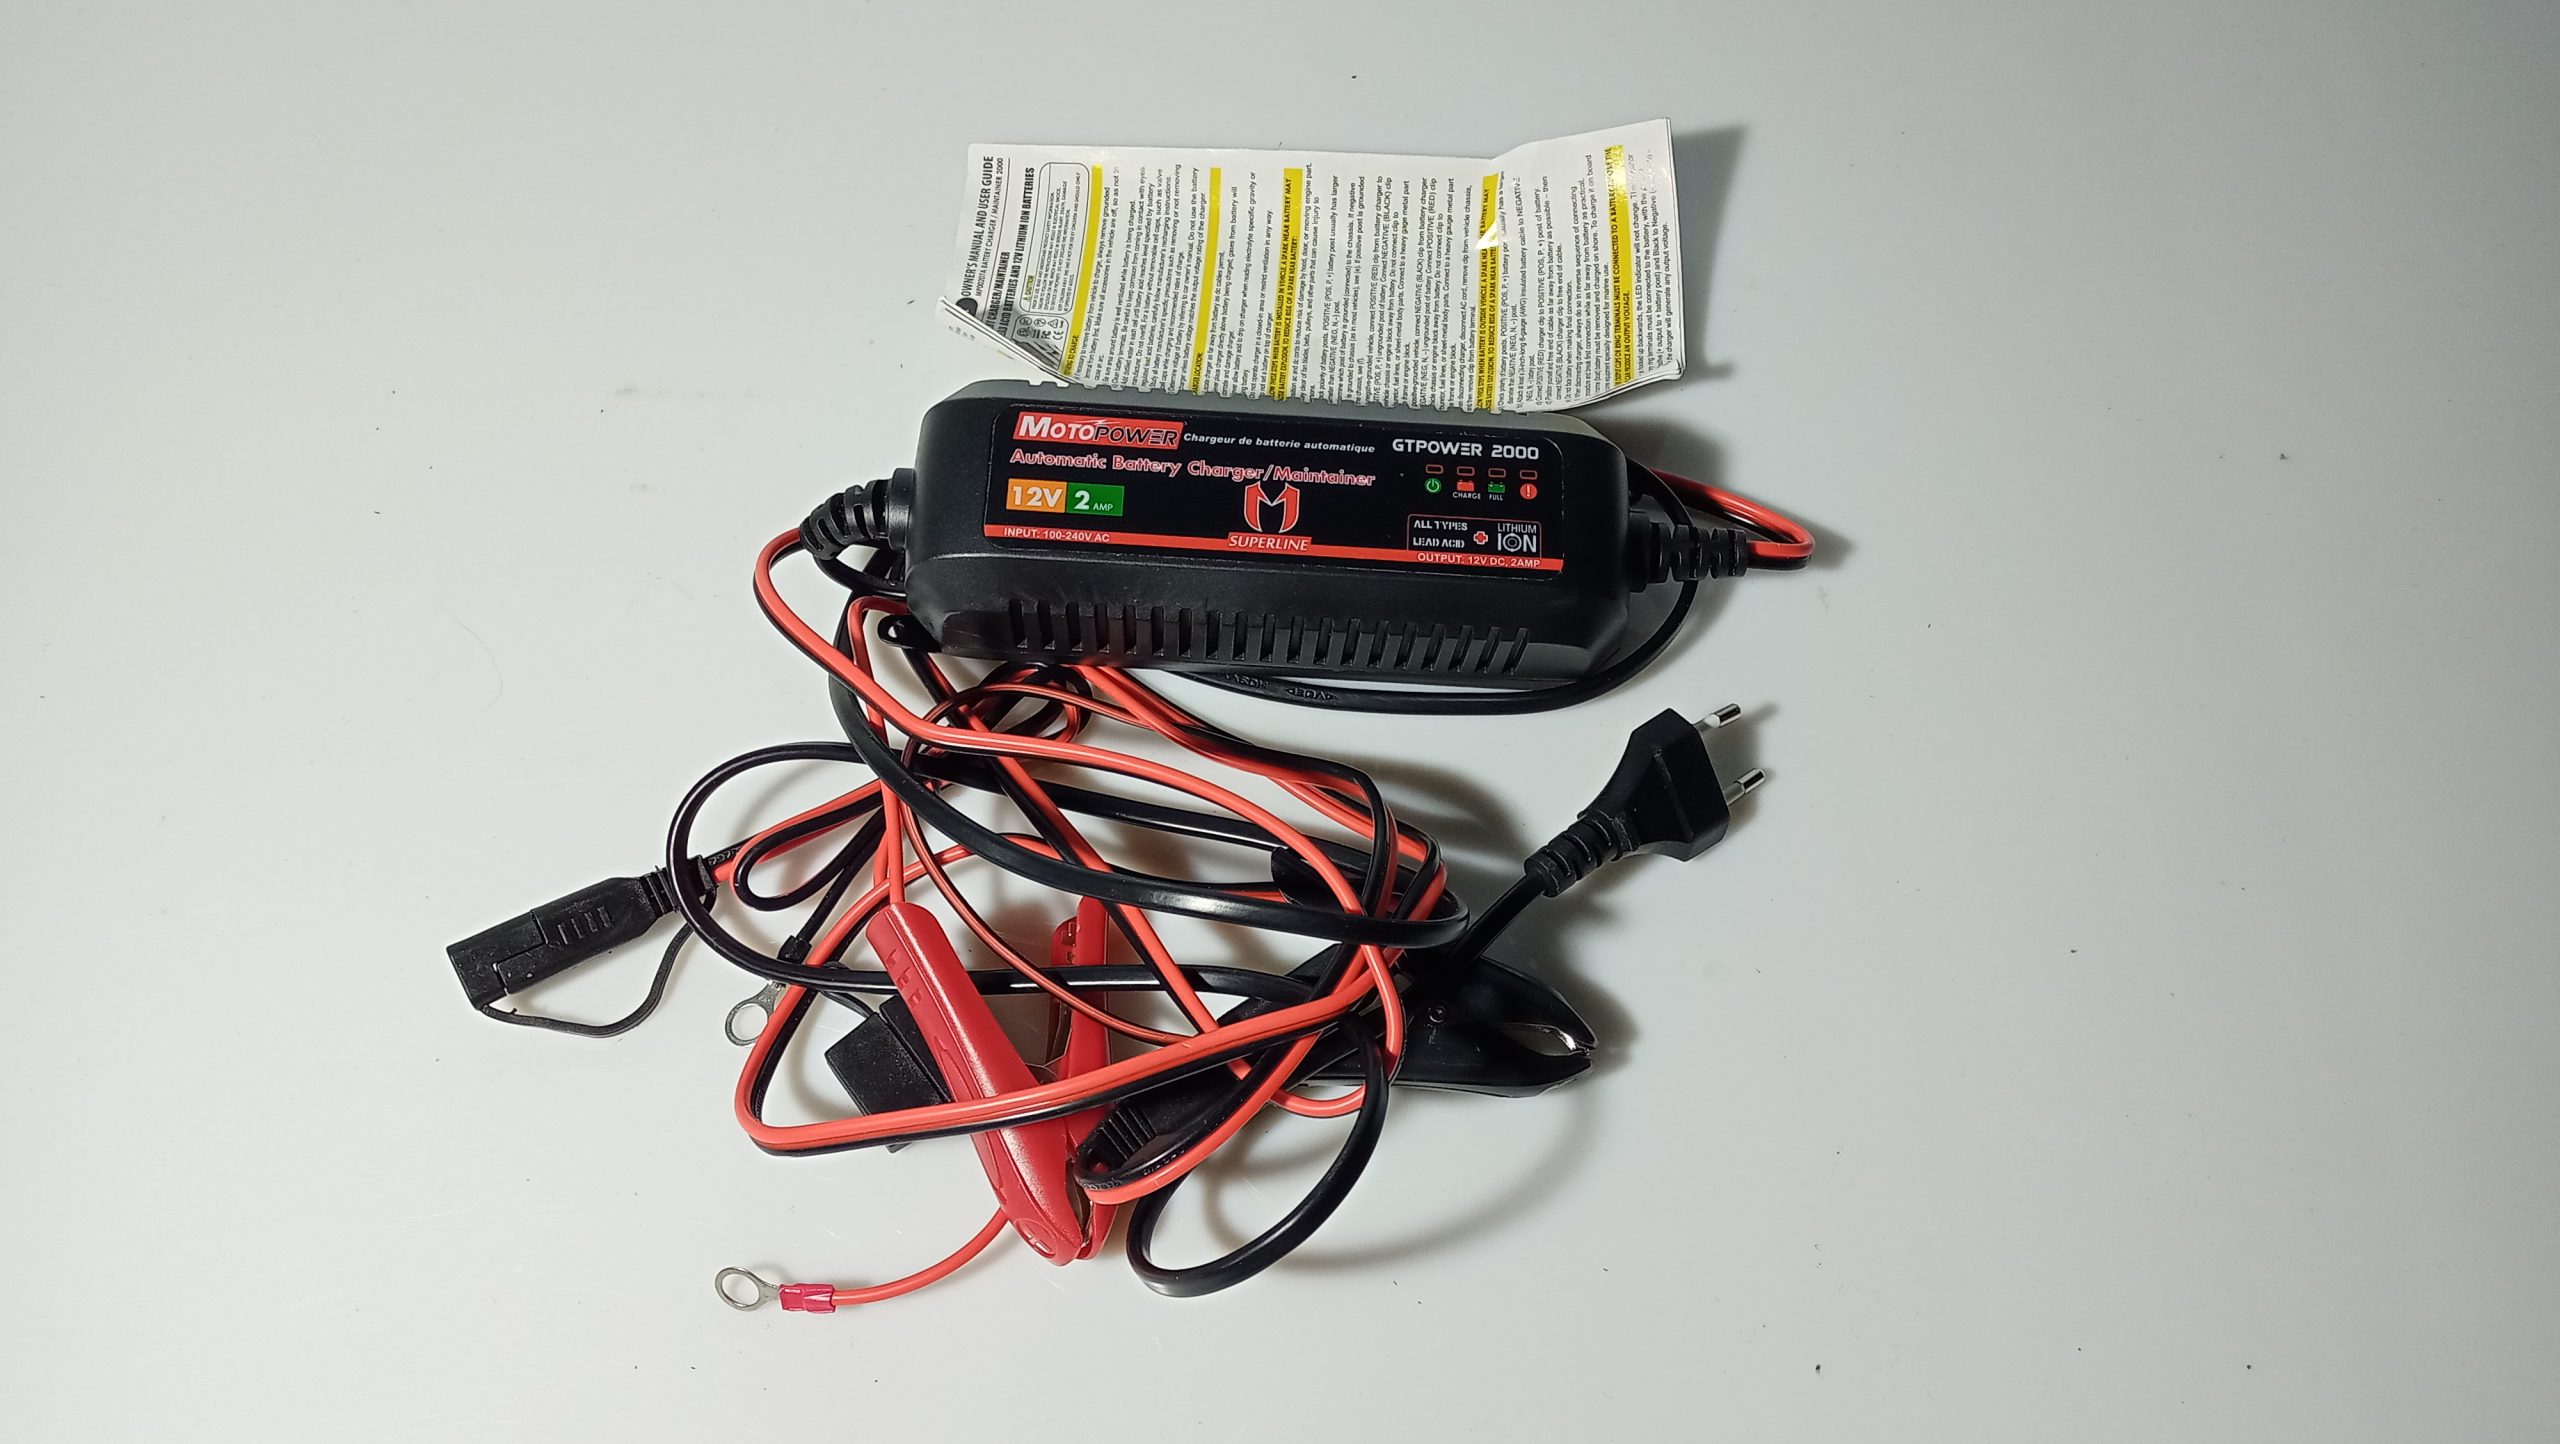 MOTOPOWER MP00207A 12V 2Amp Automatic Battery Charger for Lithium